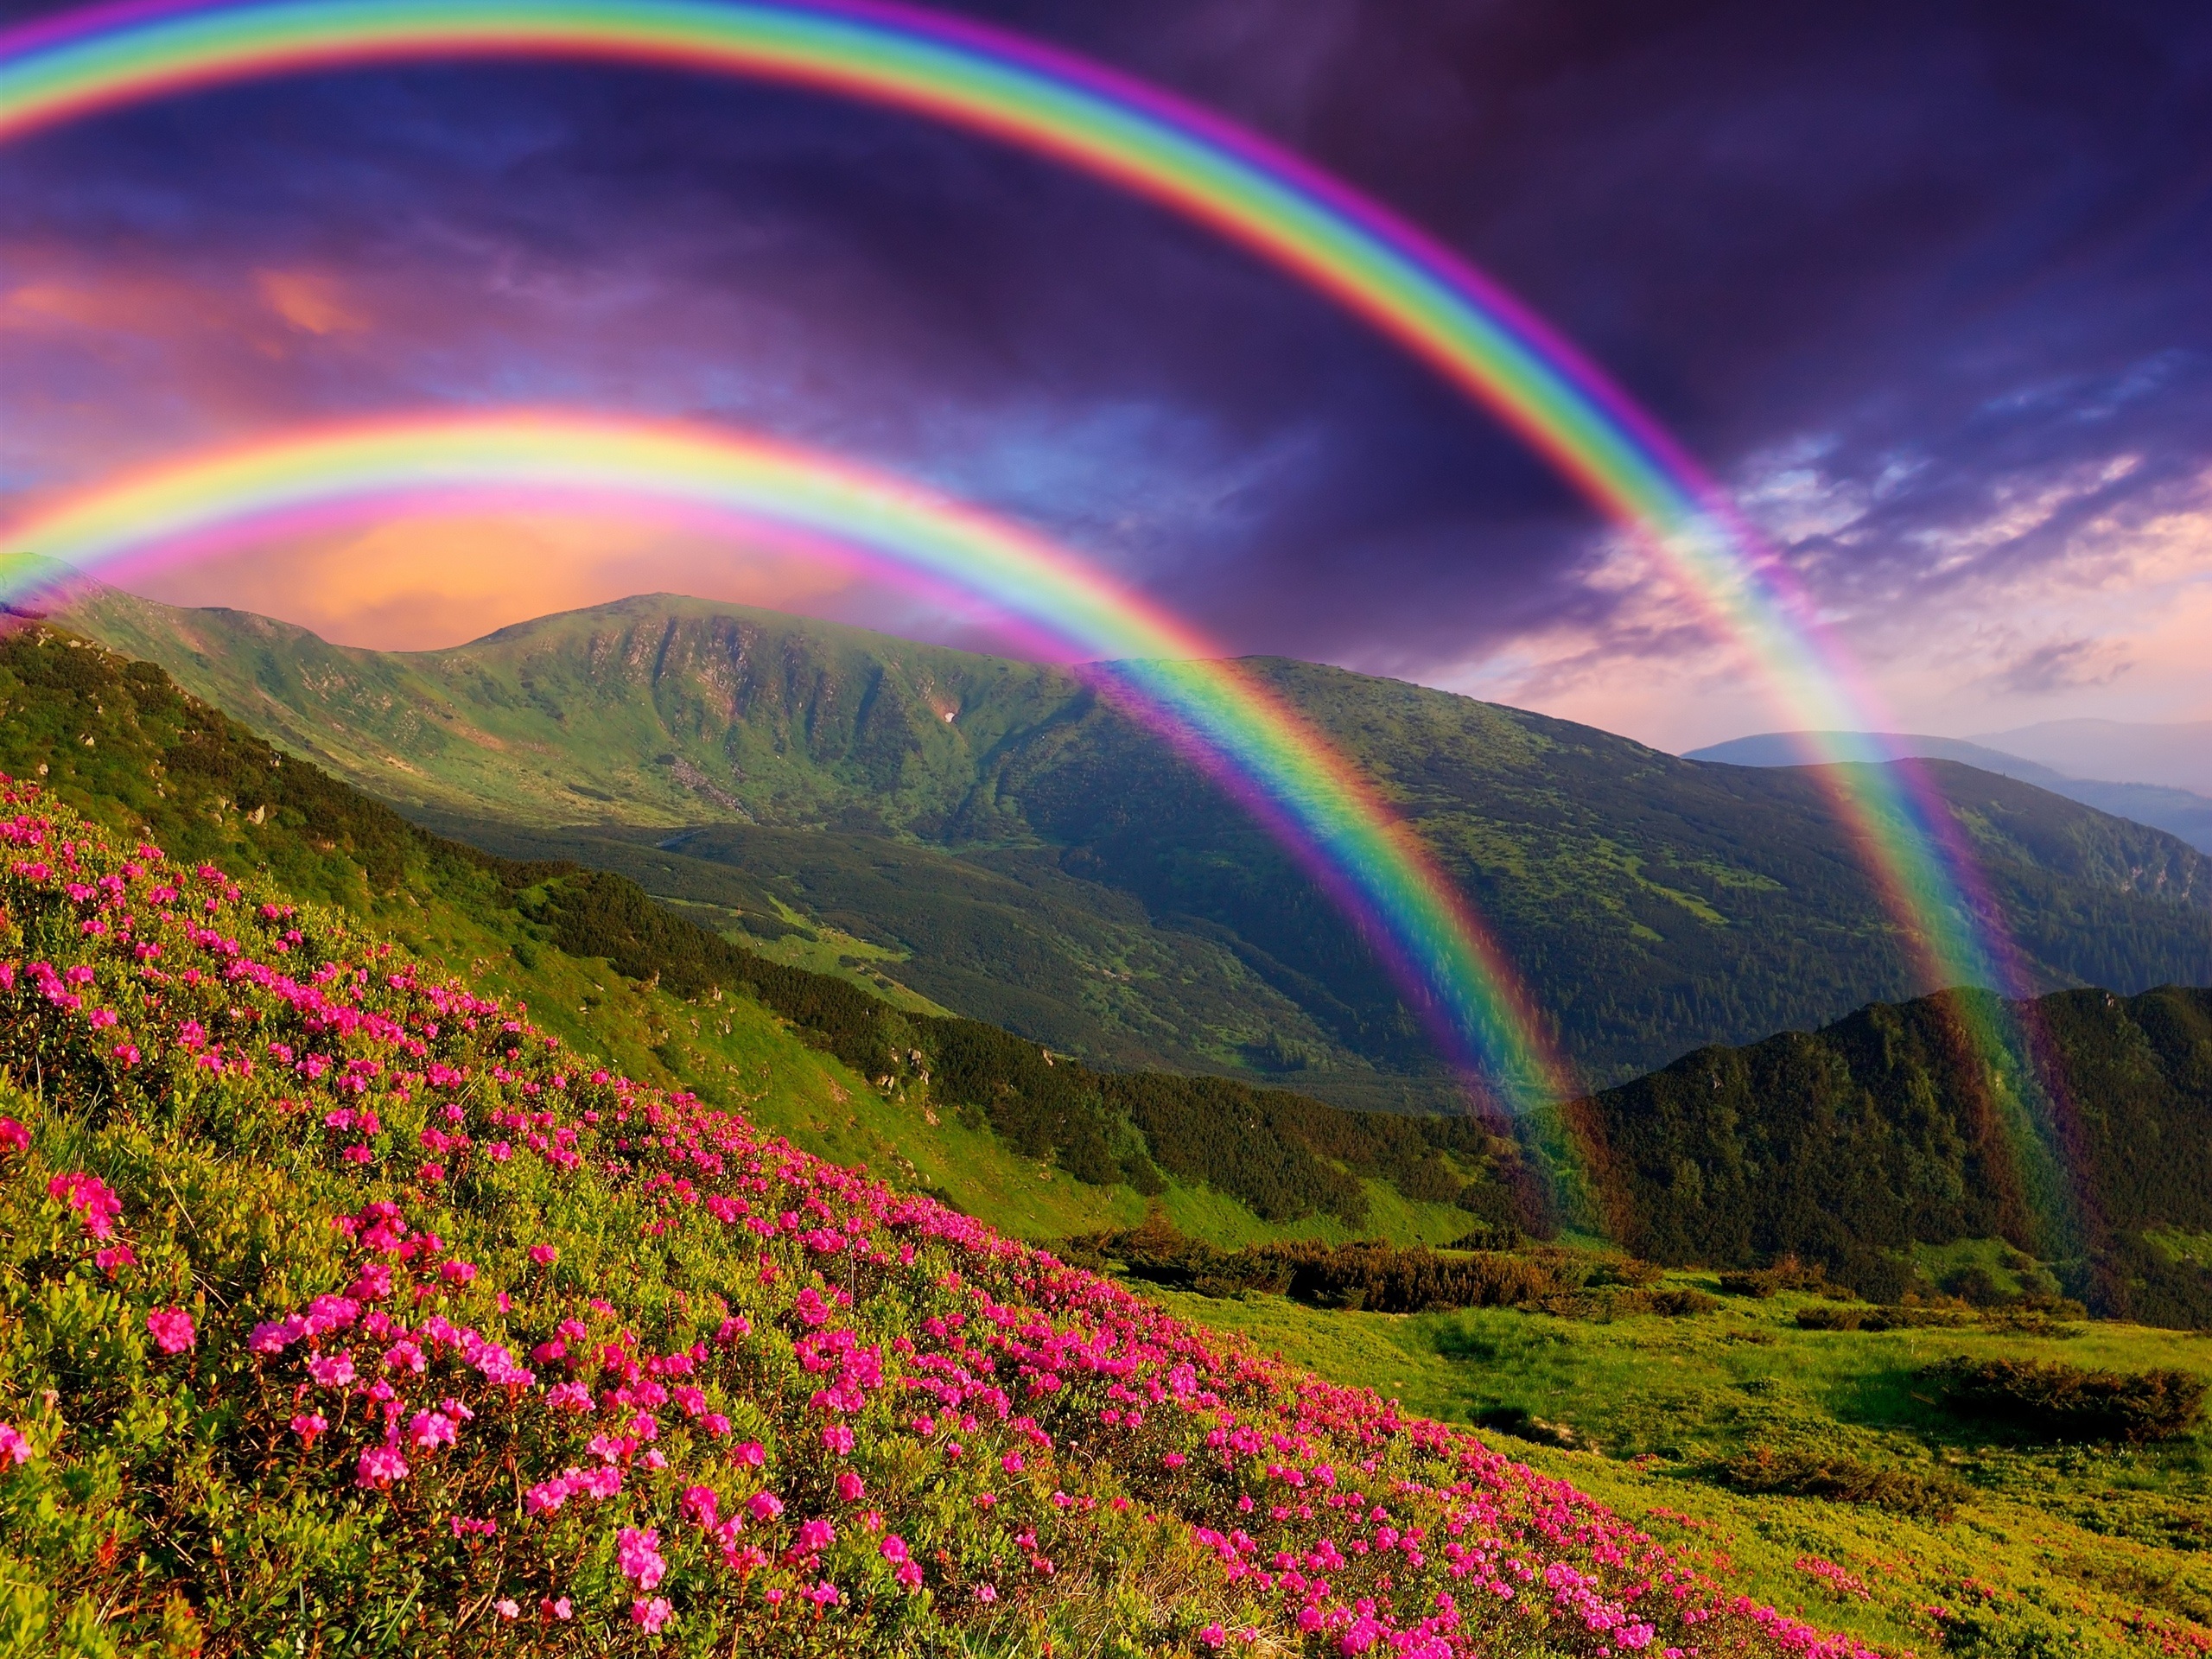 Download wallpaper for 480x800 resolution | Nature landscape, mountains,  flowers, rainbow | nature and landscape | Wallpaper Better